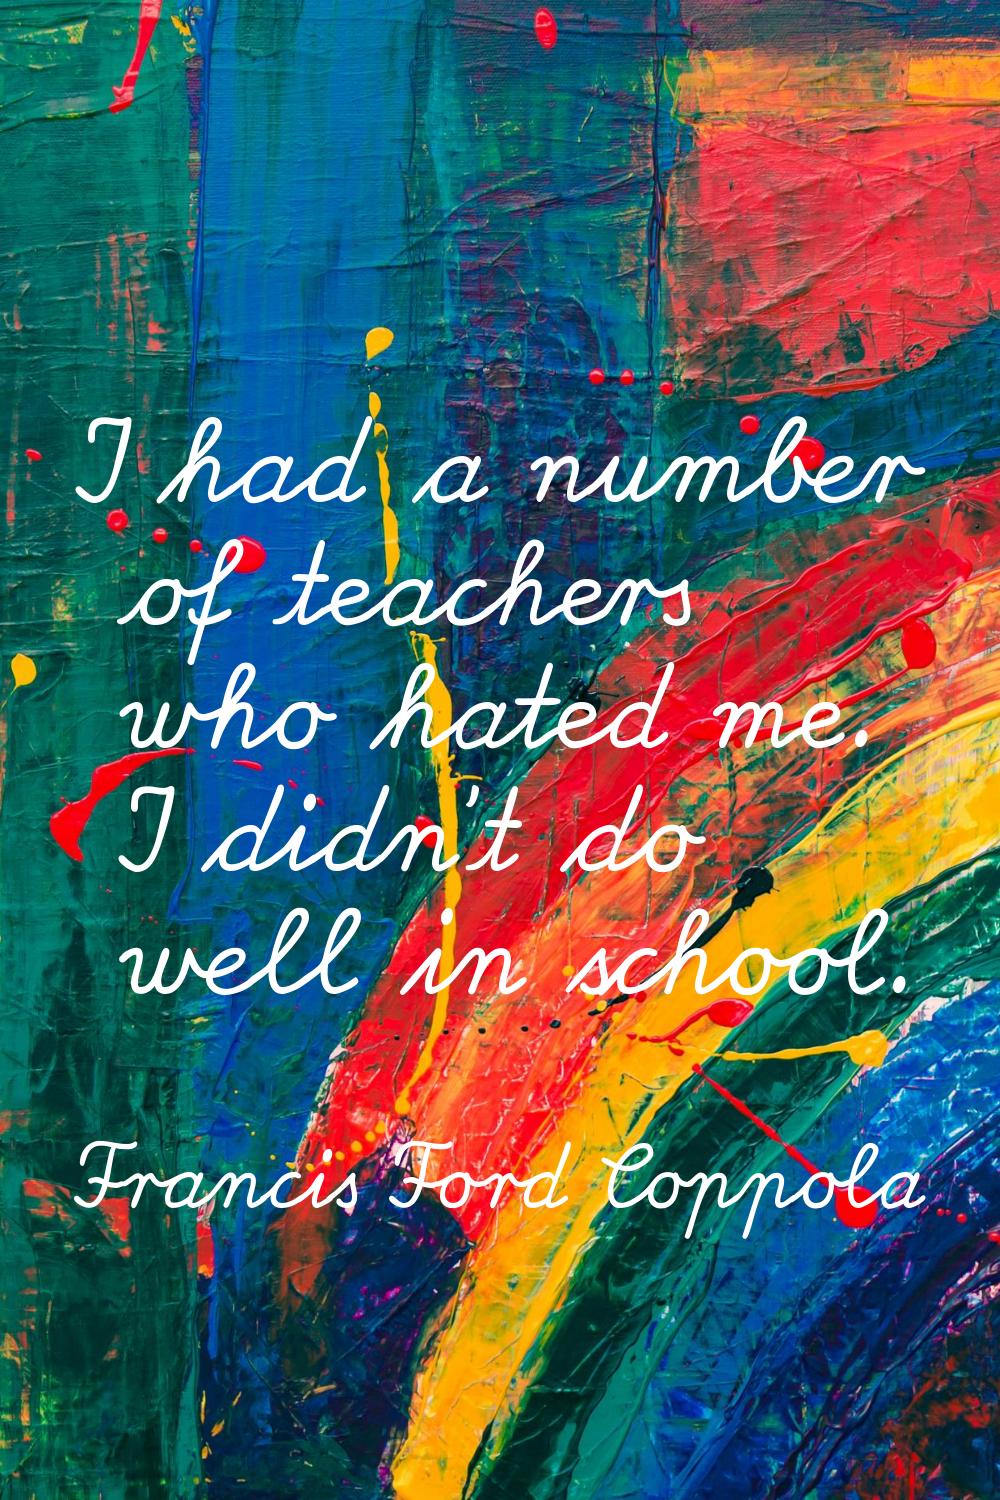 I had a number of teachers who hated me. I didn't do well in school.